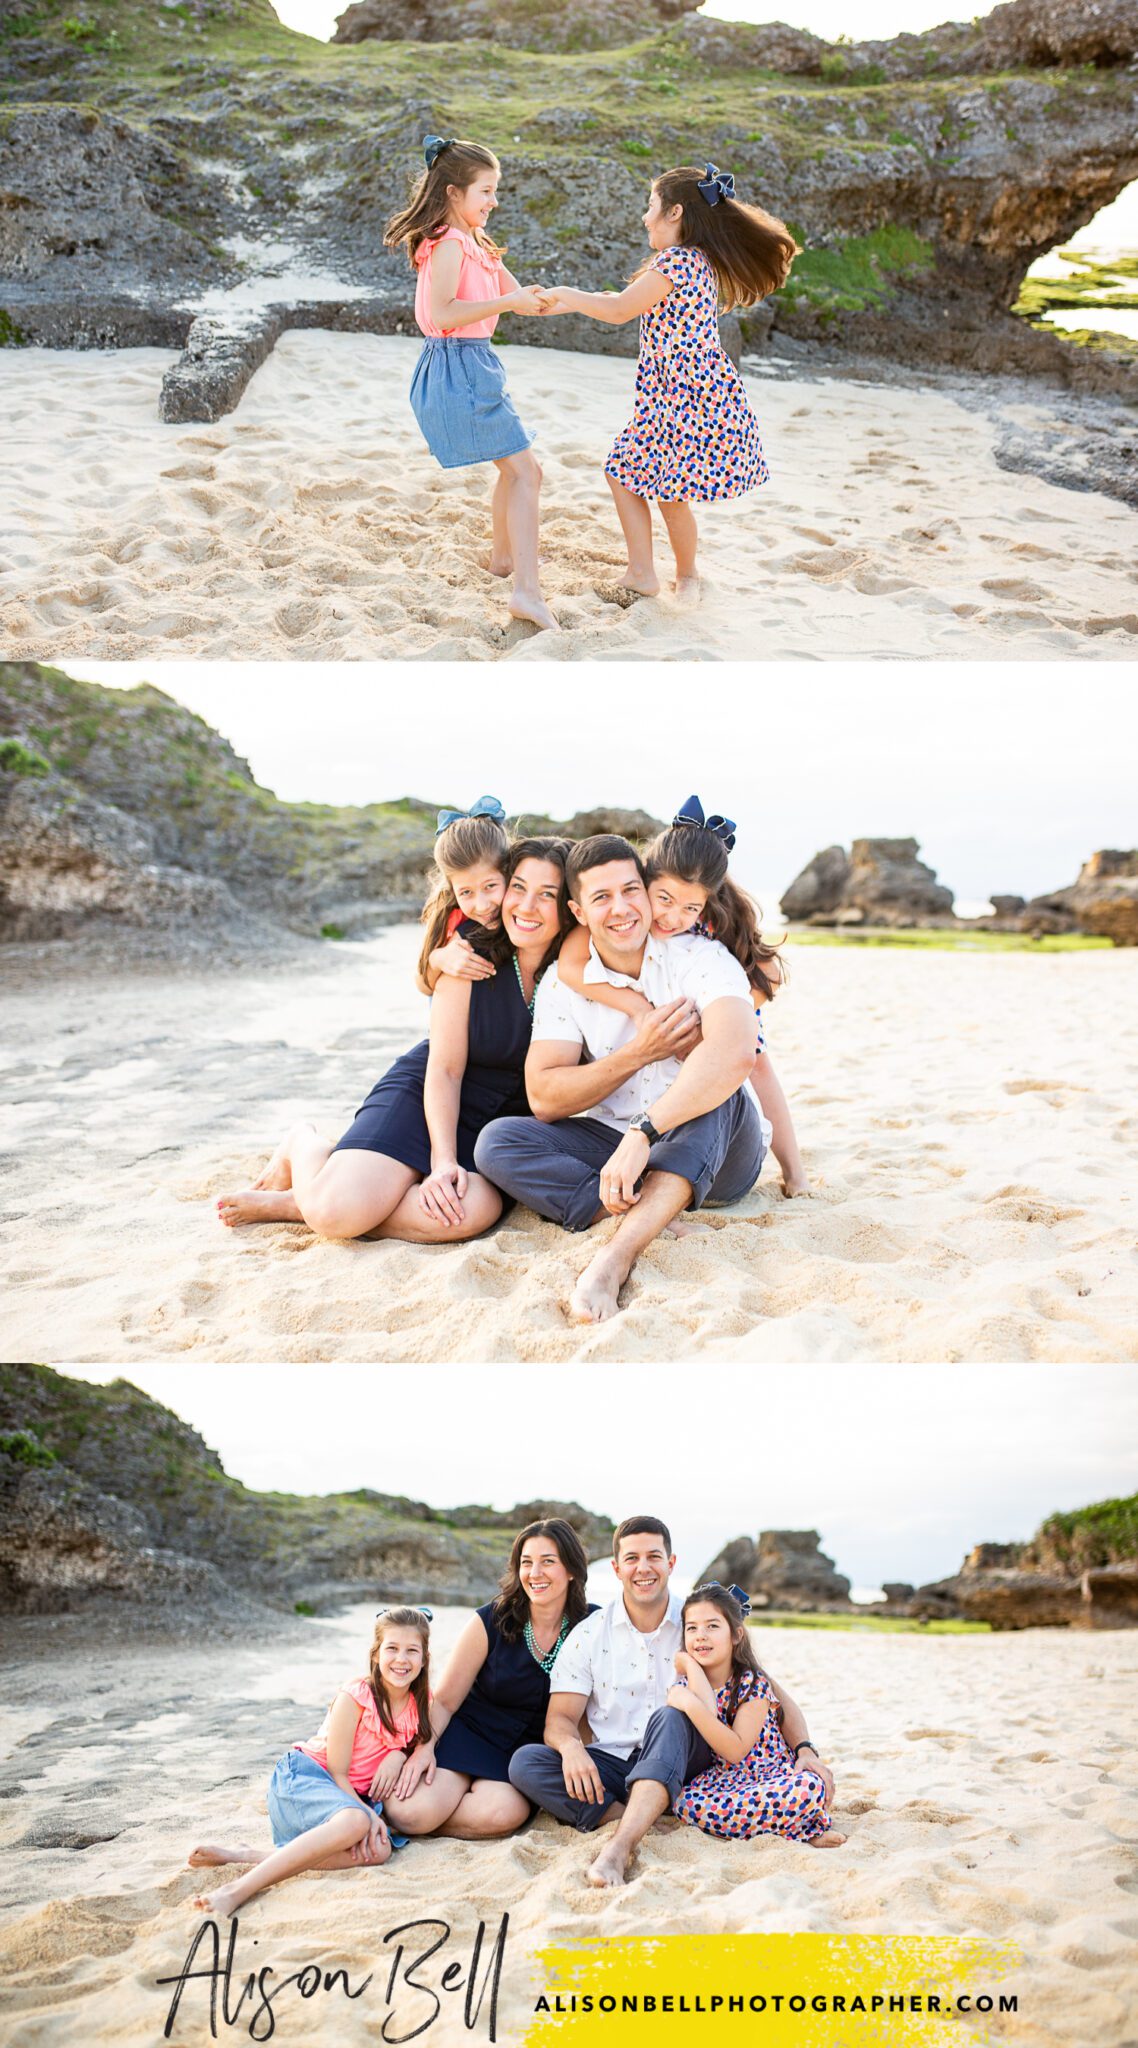 North short photographers hawaii - family beach photo session by alison bell, photographer